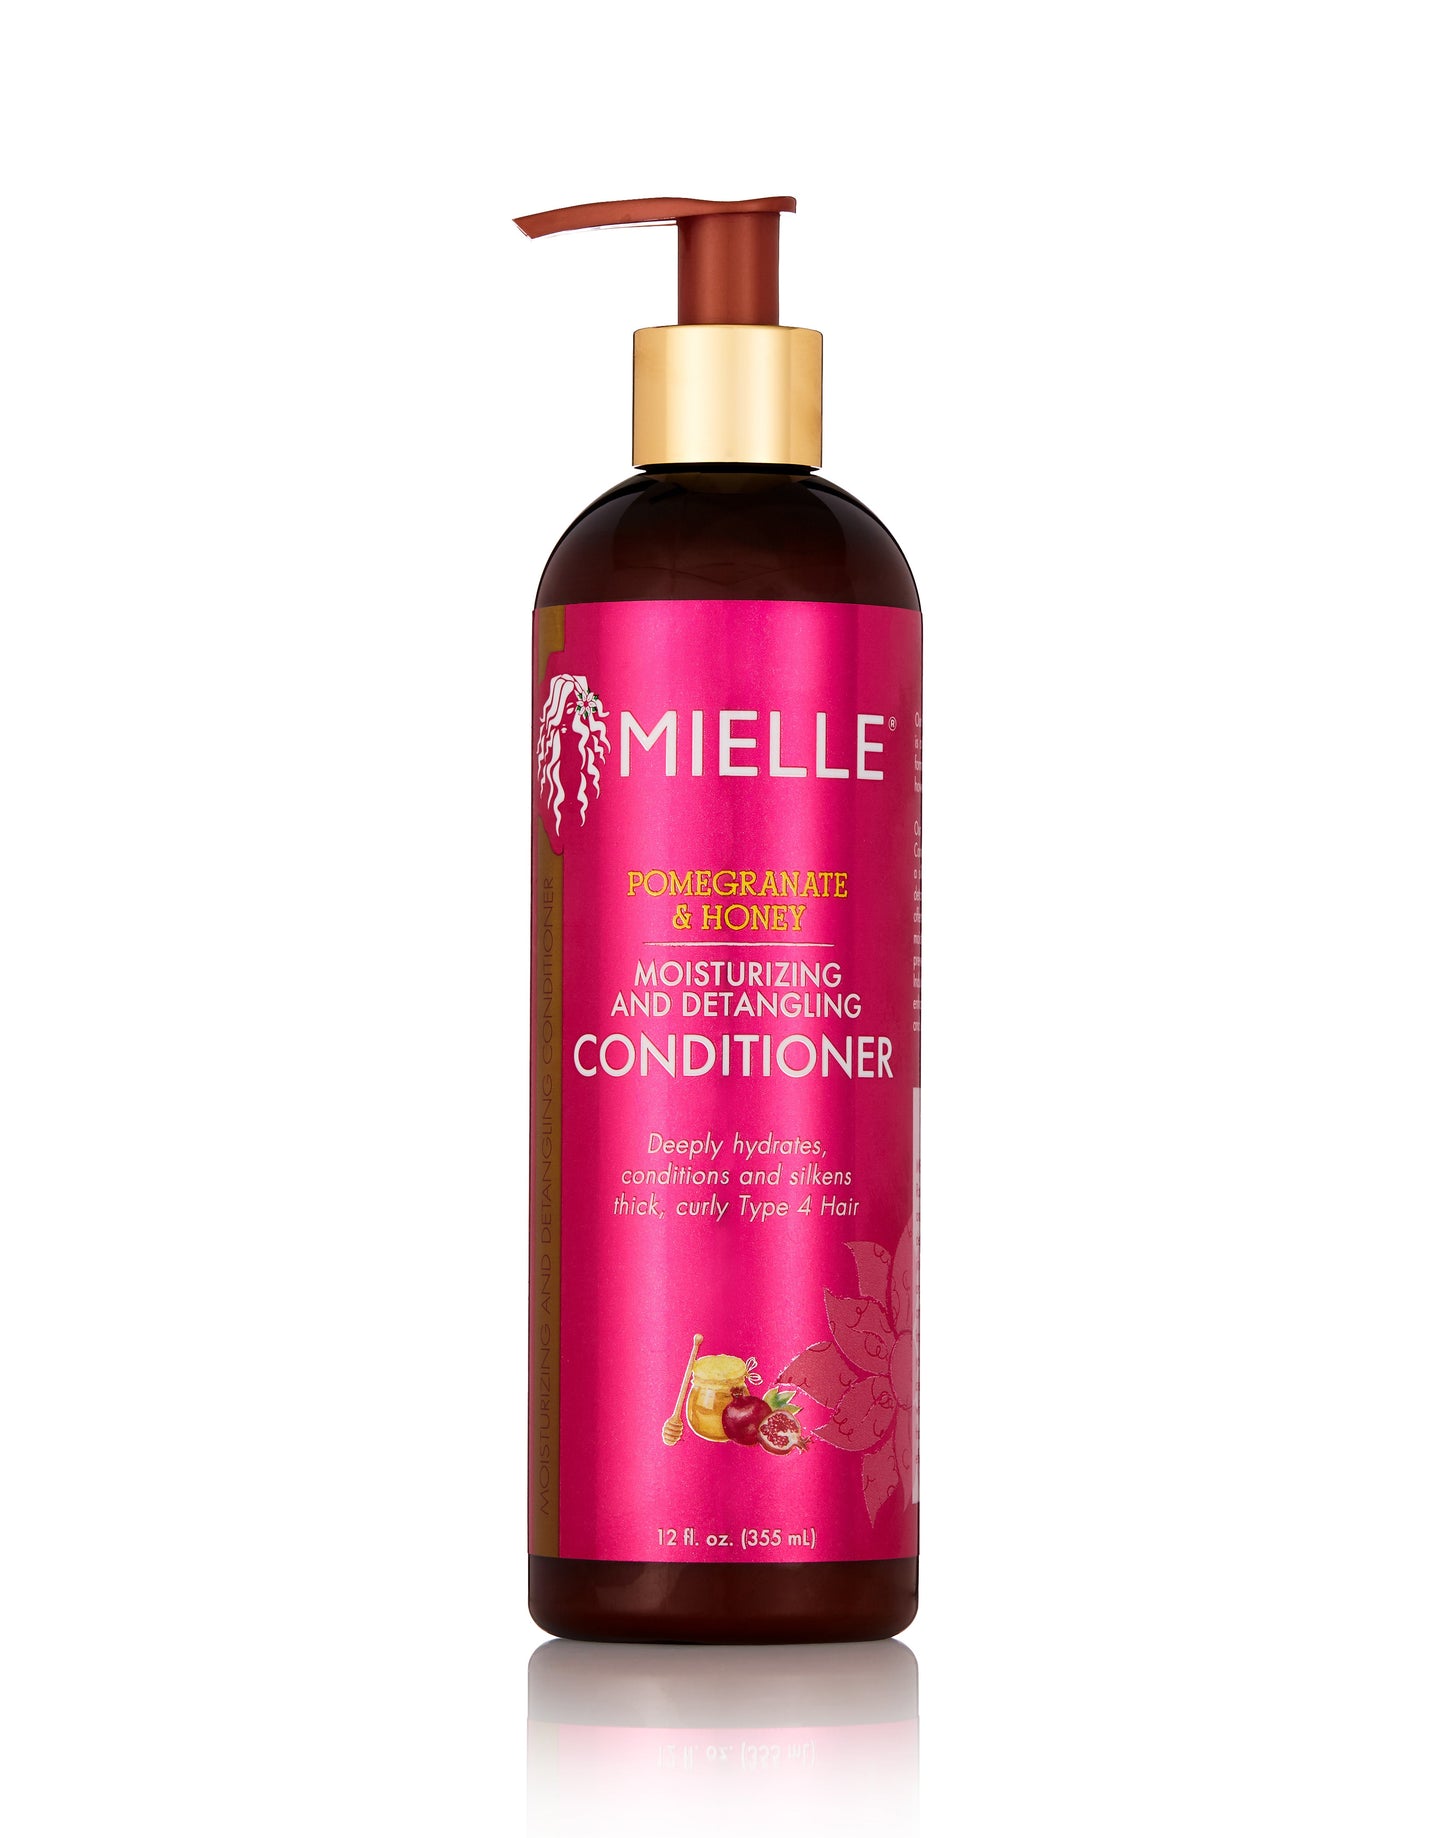 Mielle Organics Pomegranate and Honey Moisturizing and Detangling Conditioner Another Beauty Supply Company